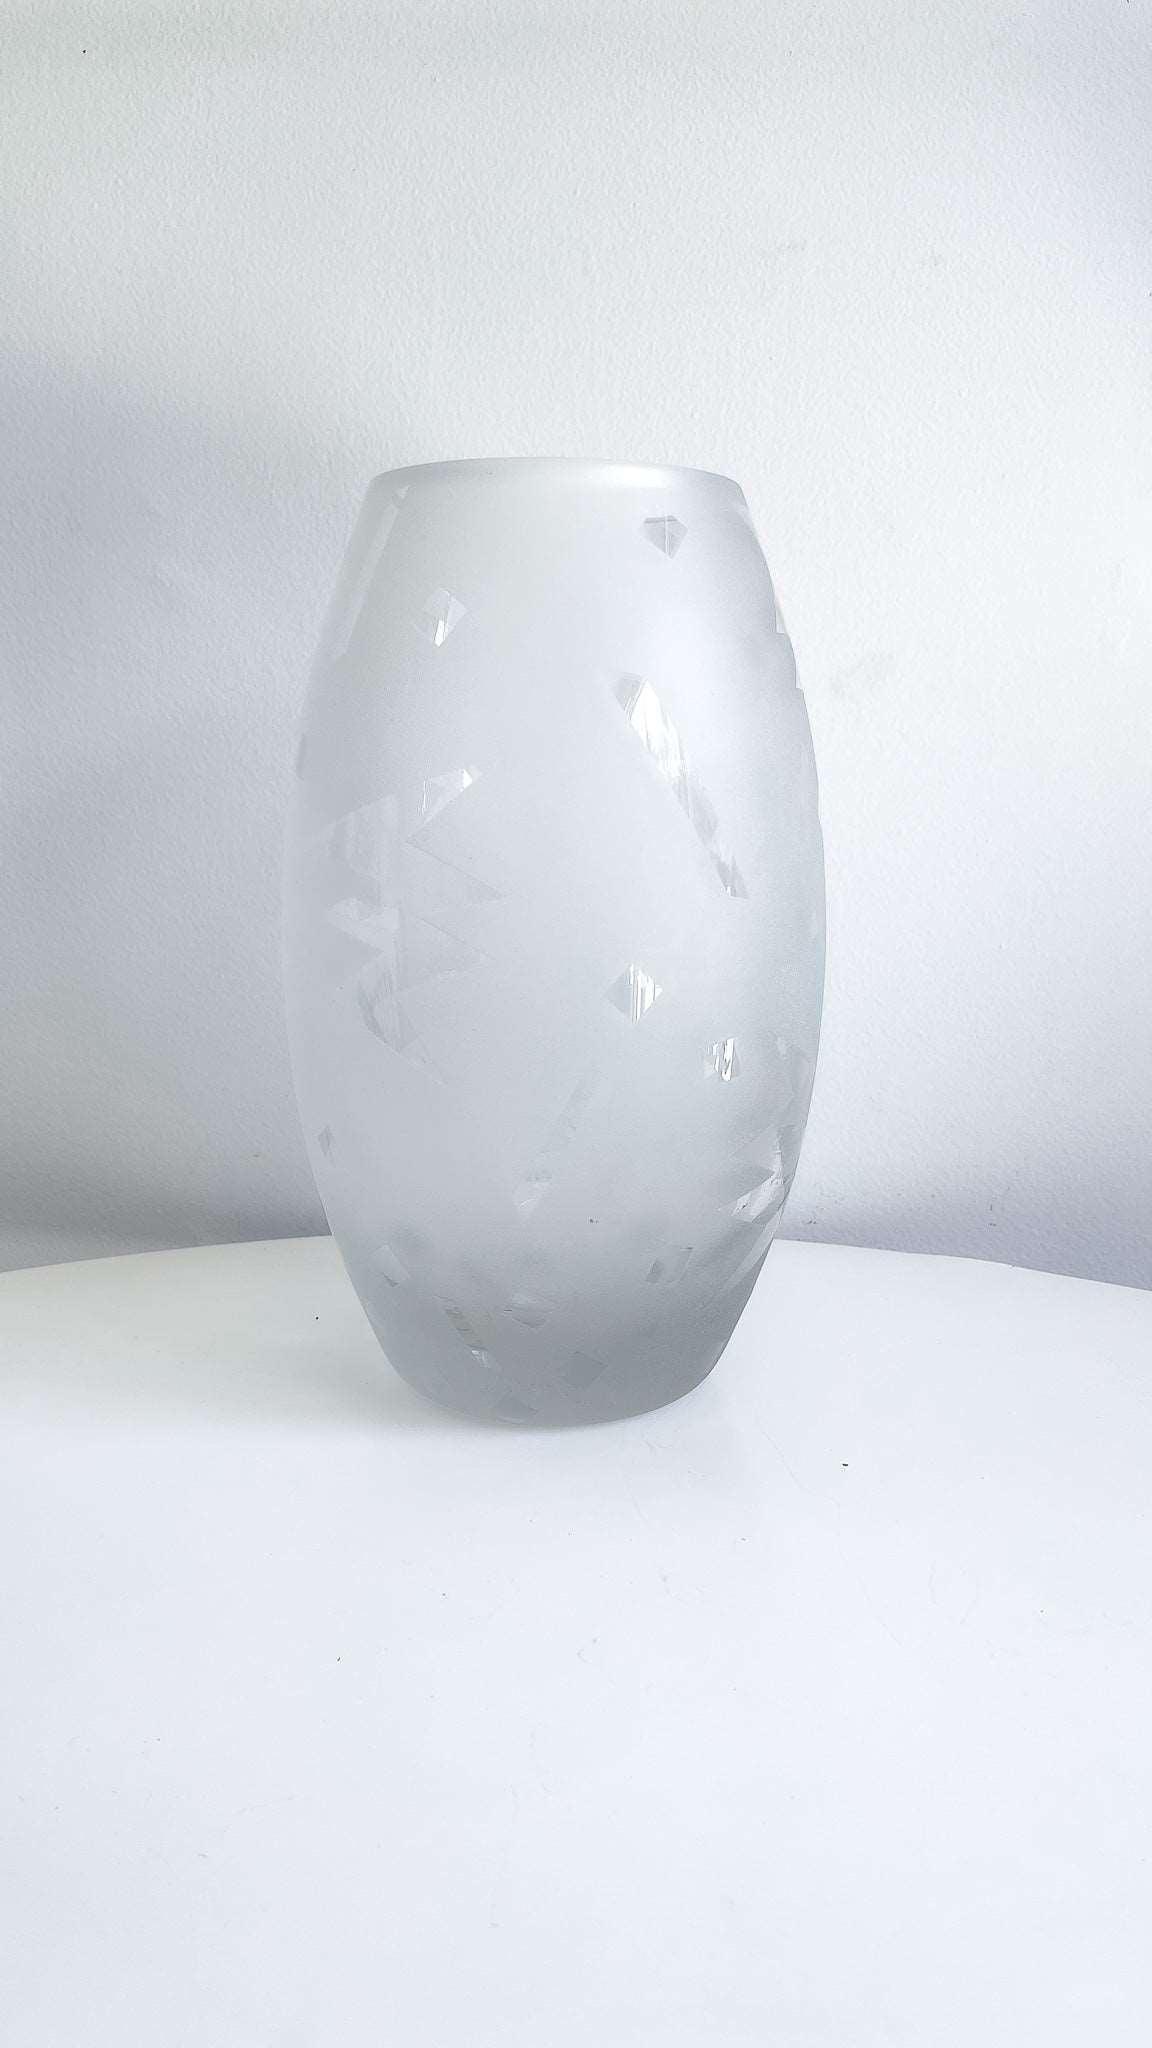 Etched Geometric Glass Vase Postmodern - Signed Gregory 1987 Polychrome Goods 🍊